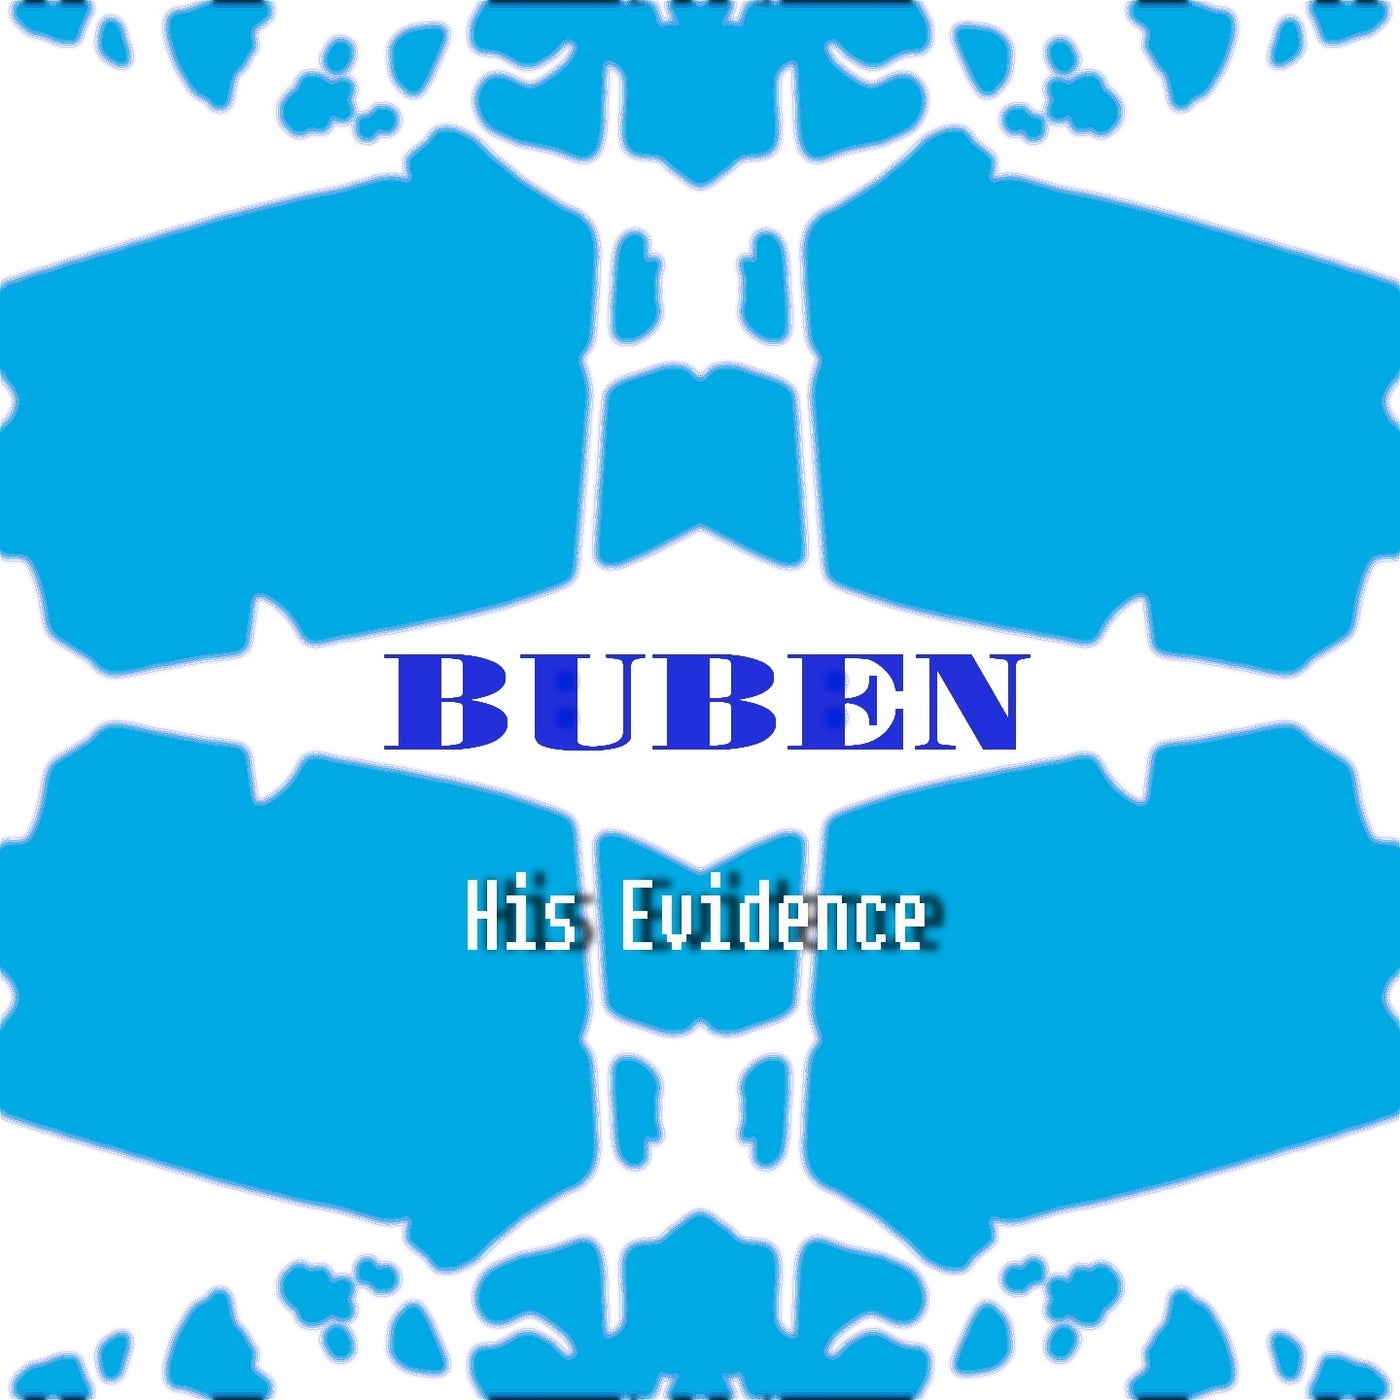 His Evidence